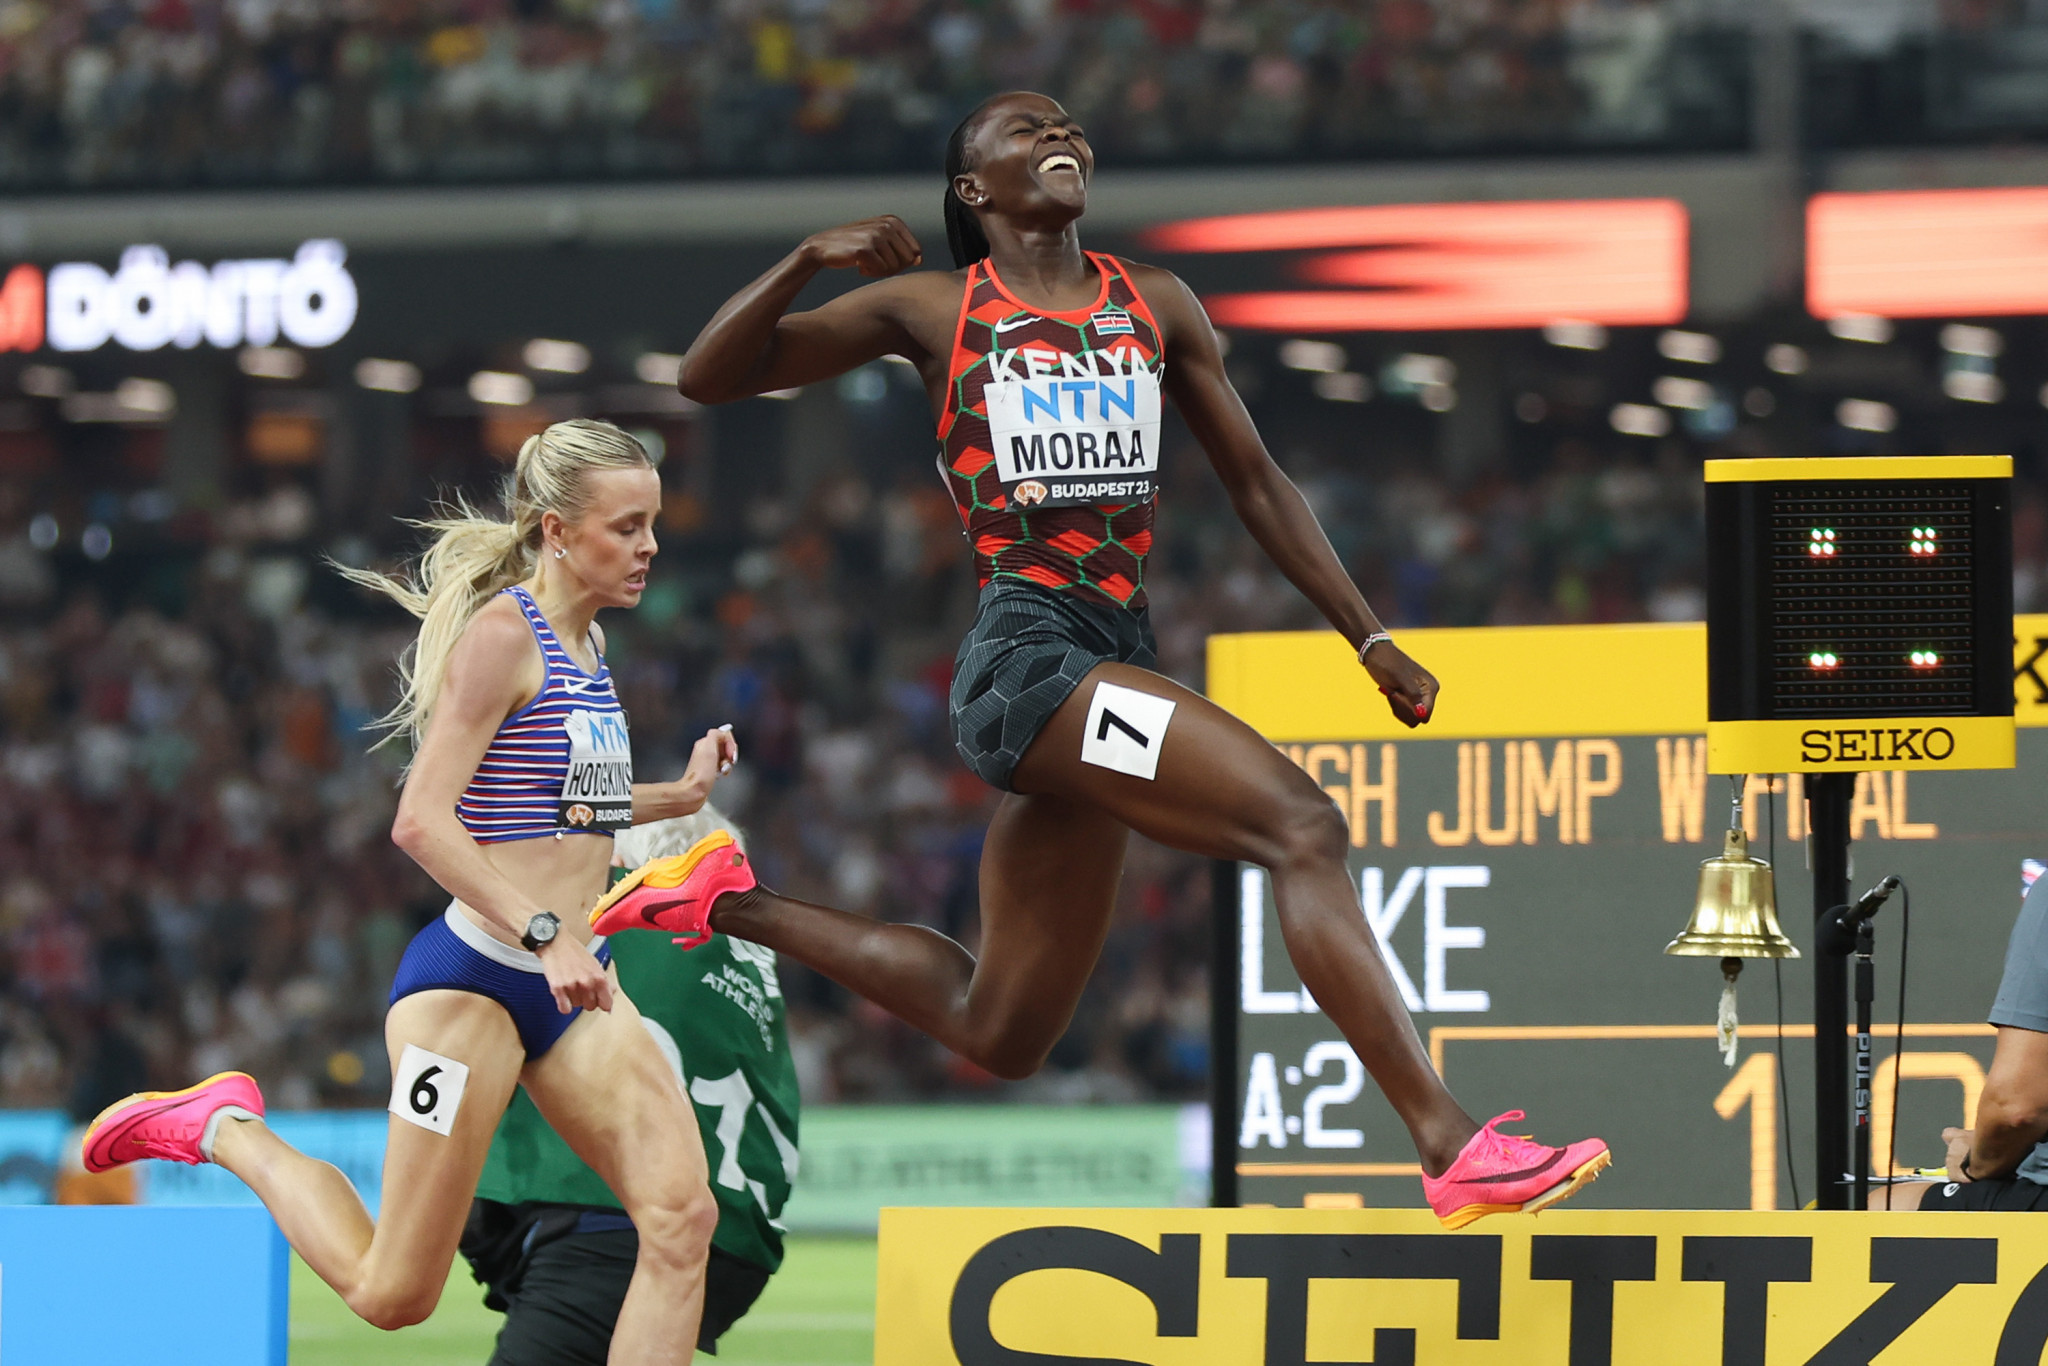 Mary Moraa, right, won a competitive women's 800m final for Kenya at the World Championships and has claimed 